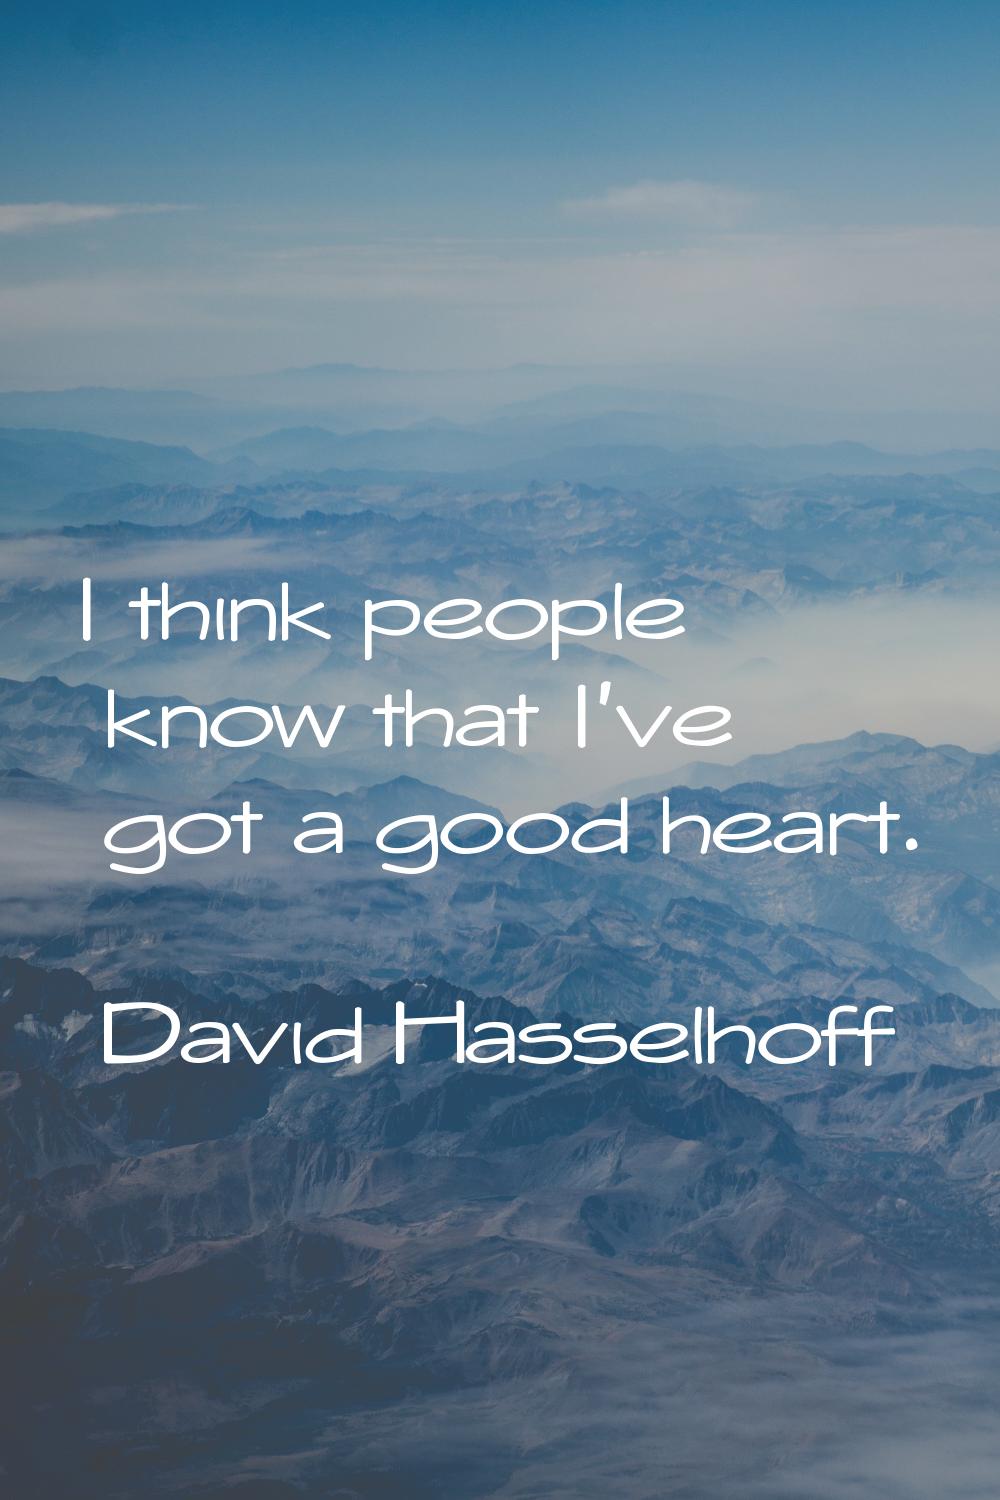 I think people know that I've got a good heart.